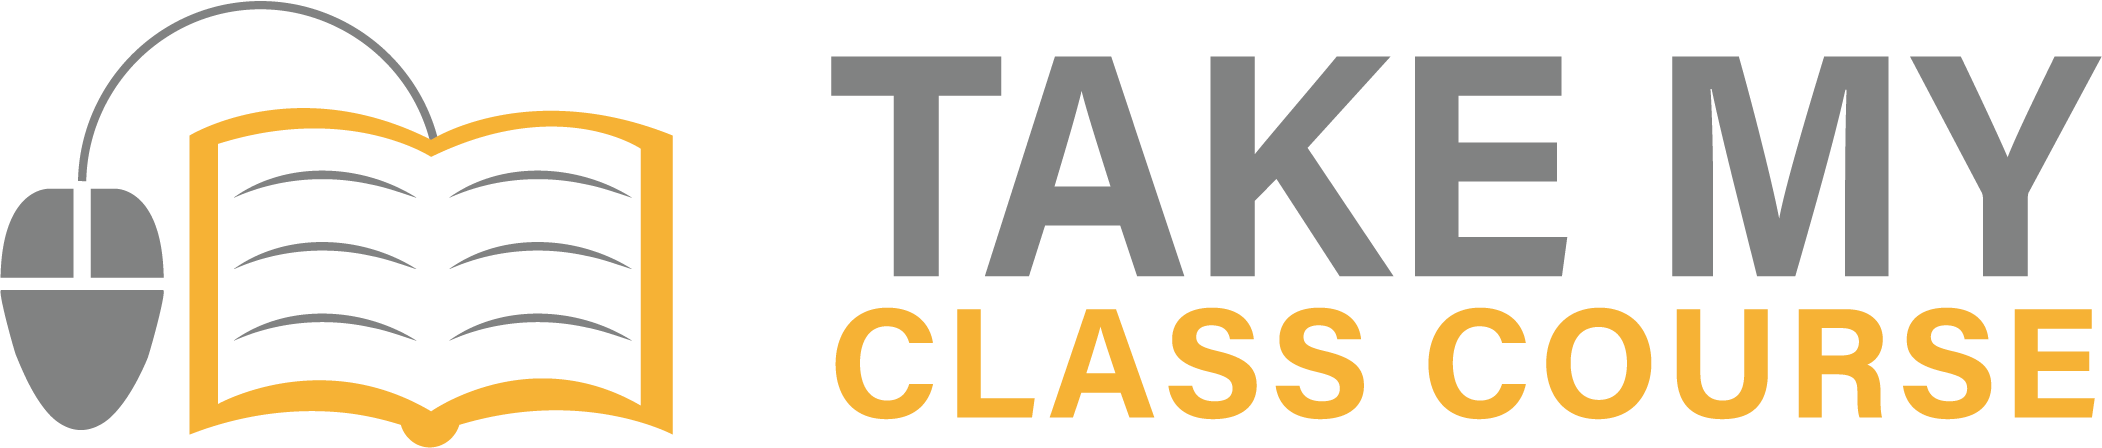 Take My Class Service | Pay for online course help